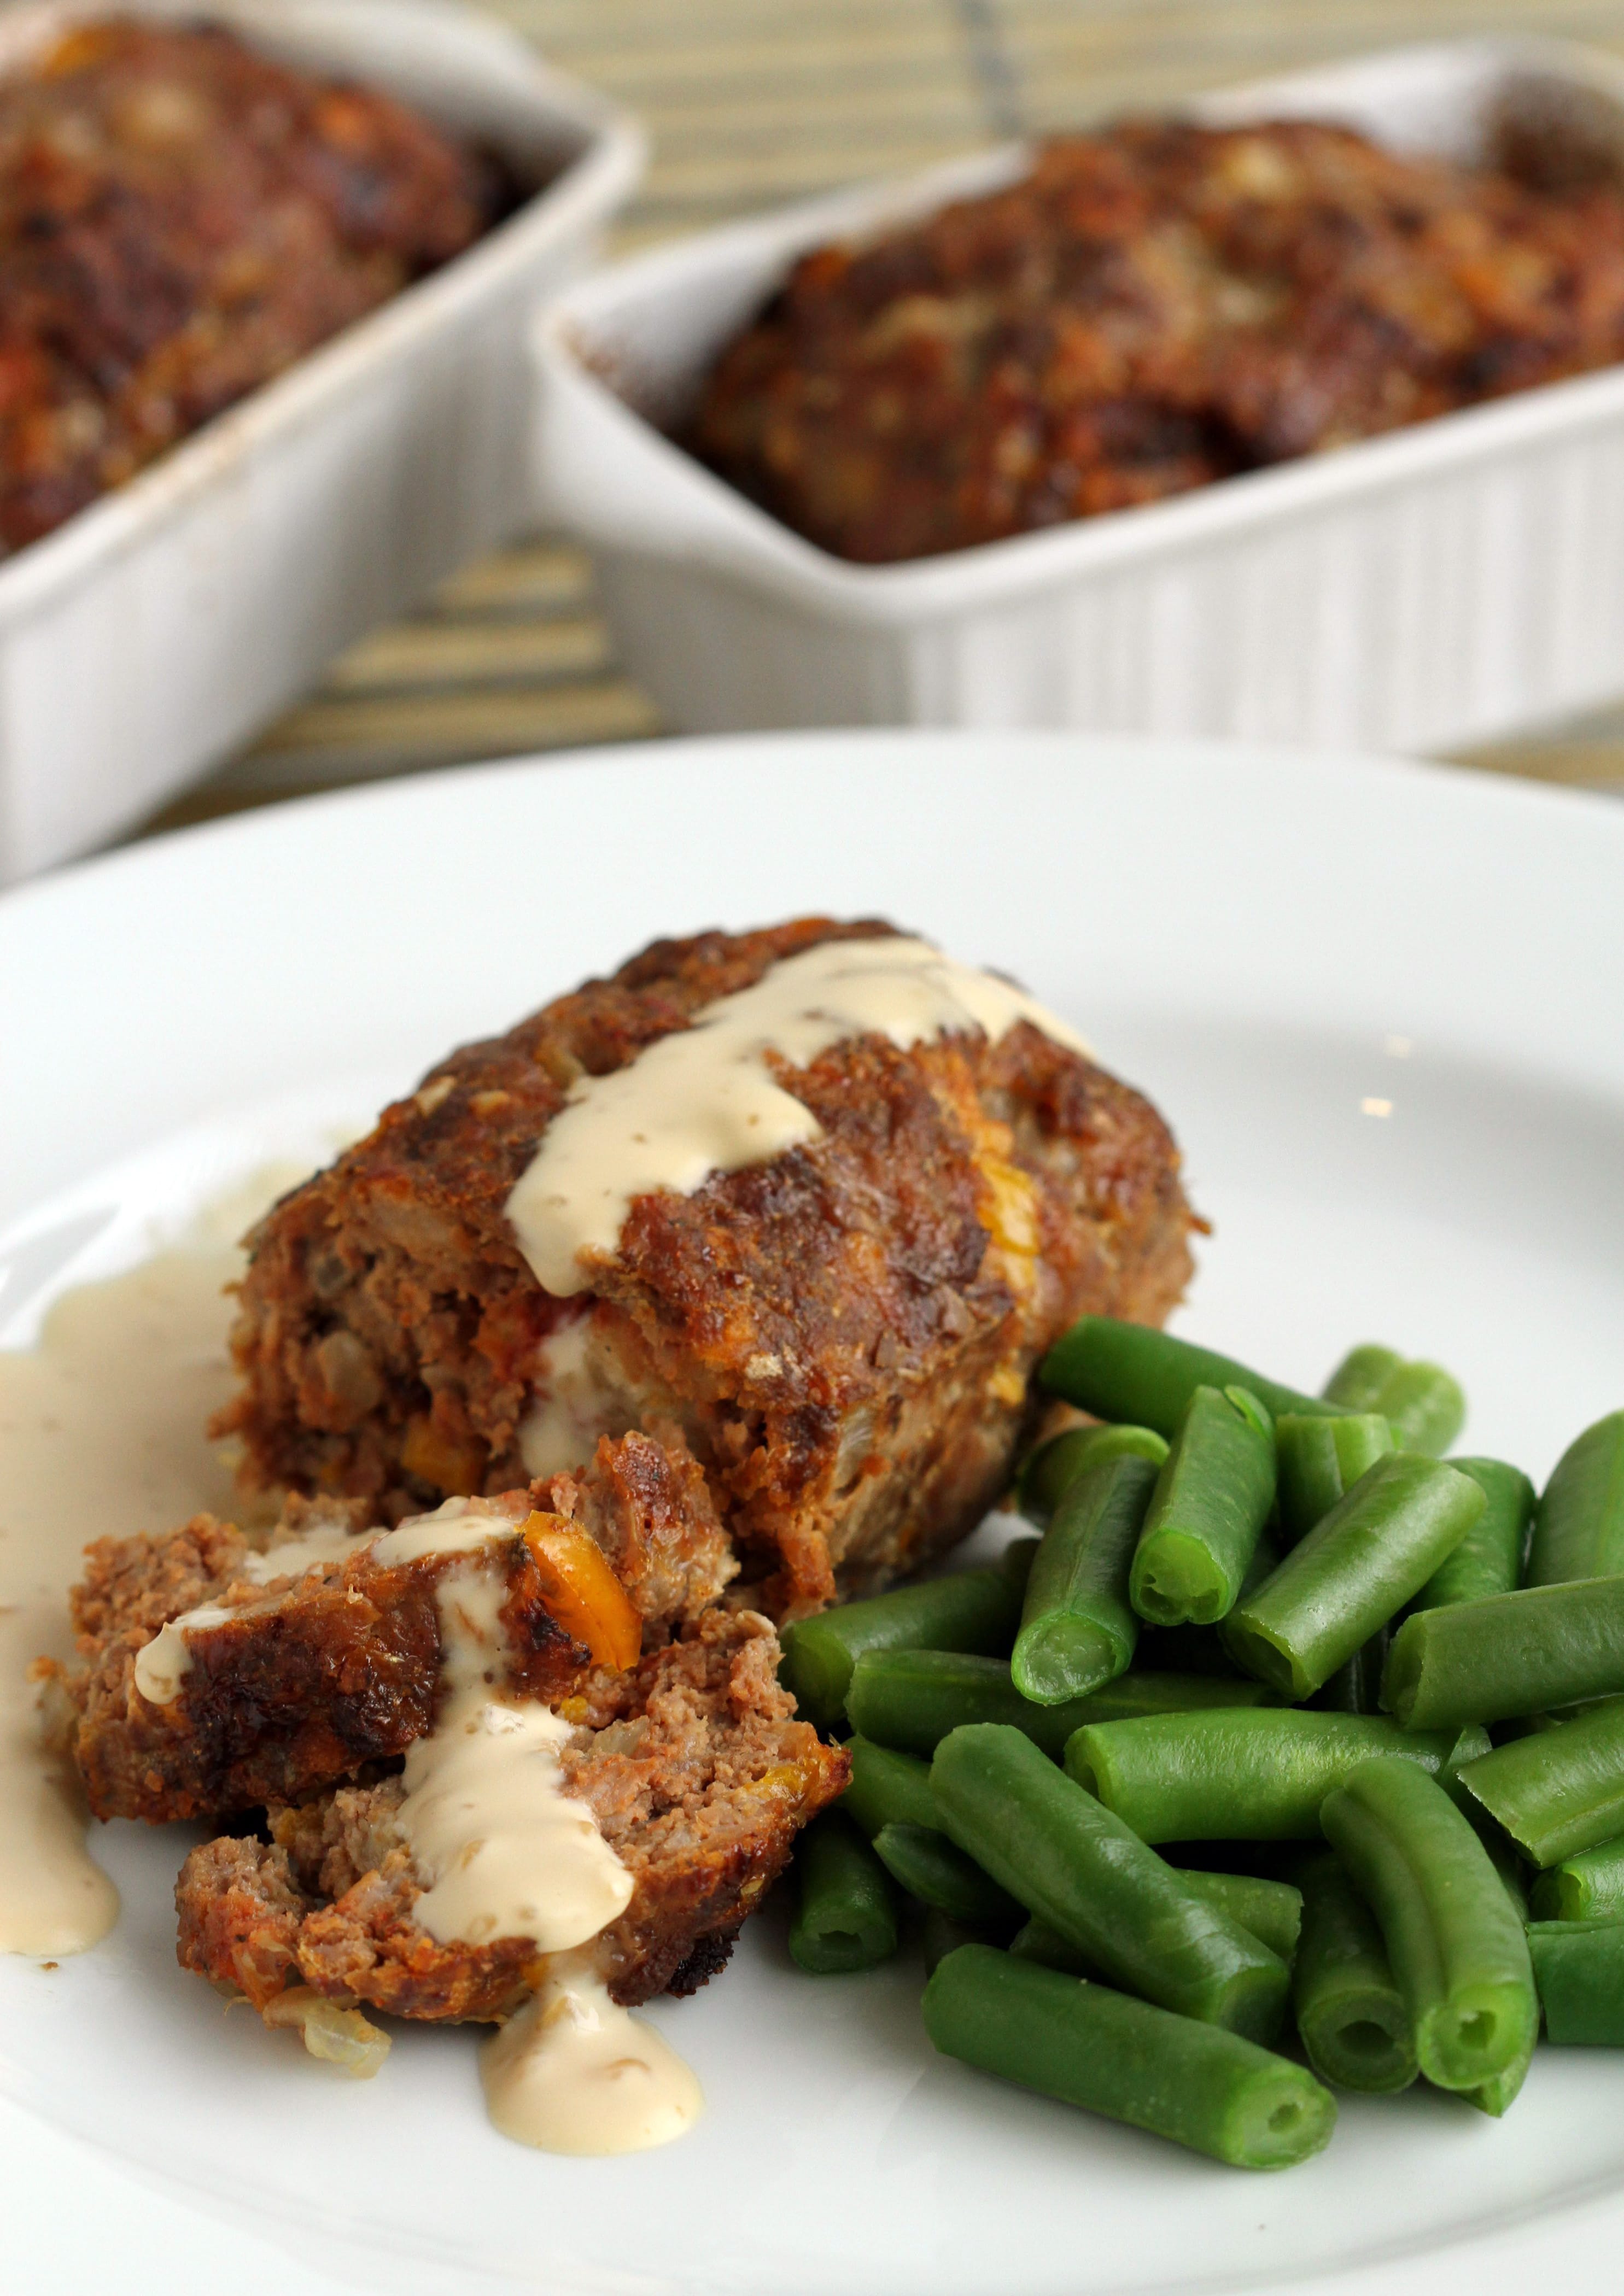 Try a new meatloaf sauce - The Columbian